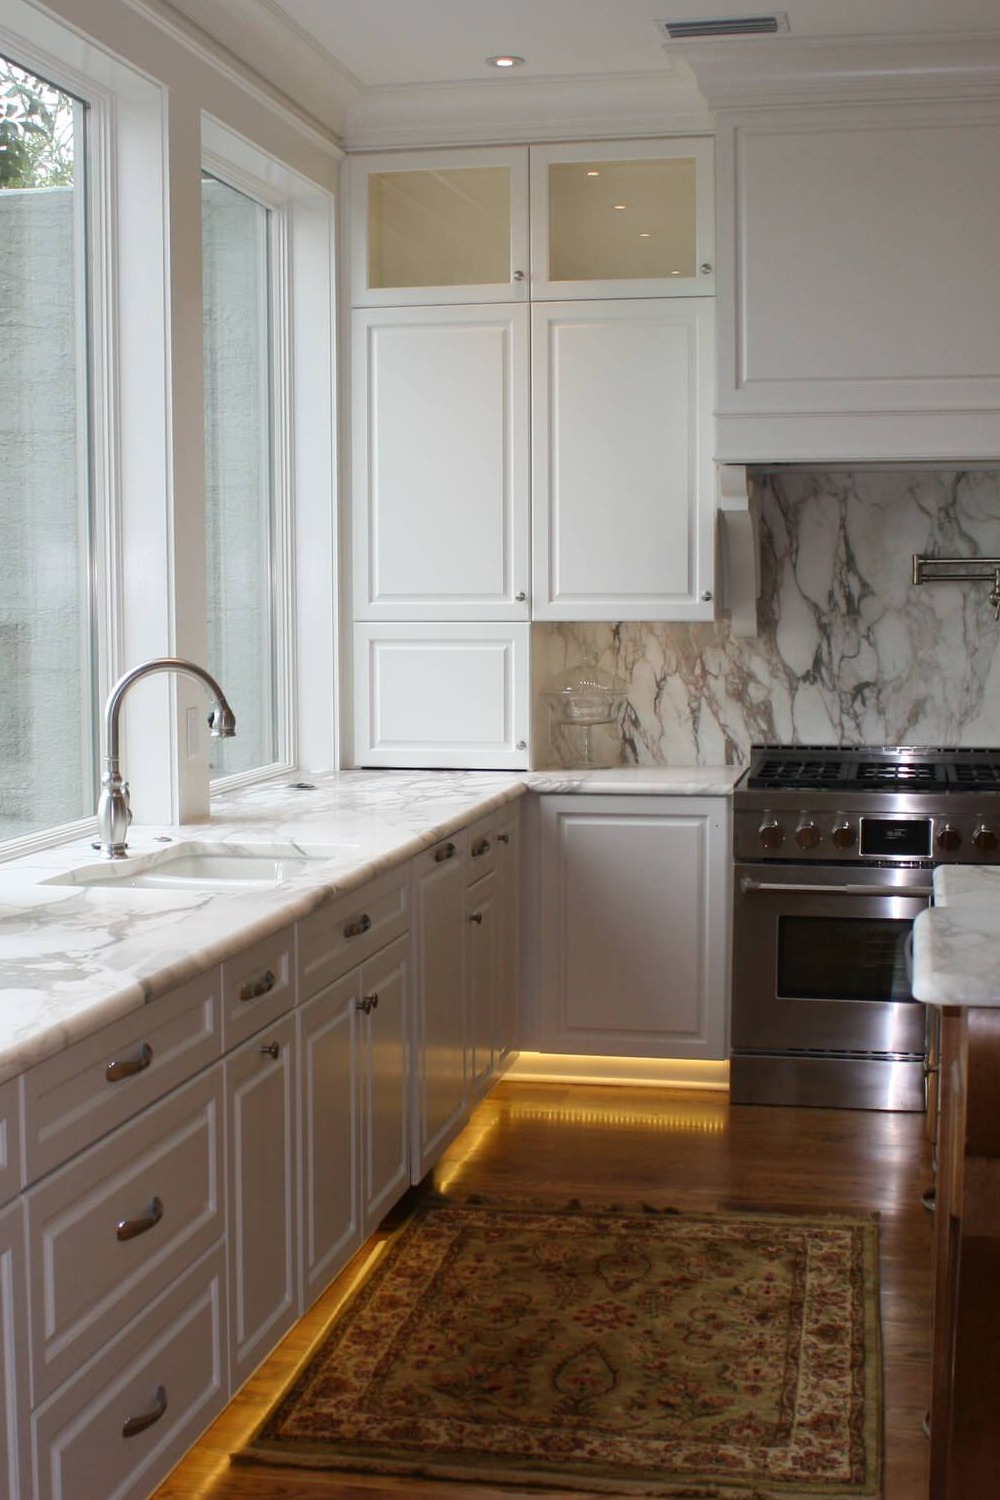 Calacatta Gold Marble Mosaic Tile Gray Tiles Stone Countertop Incorporate Color White Kitchen